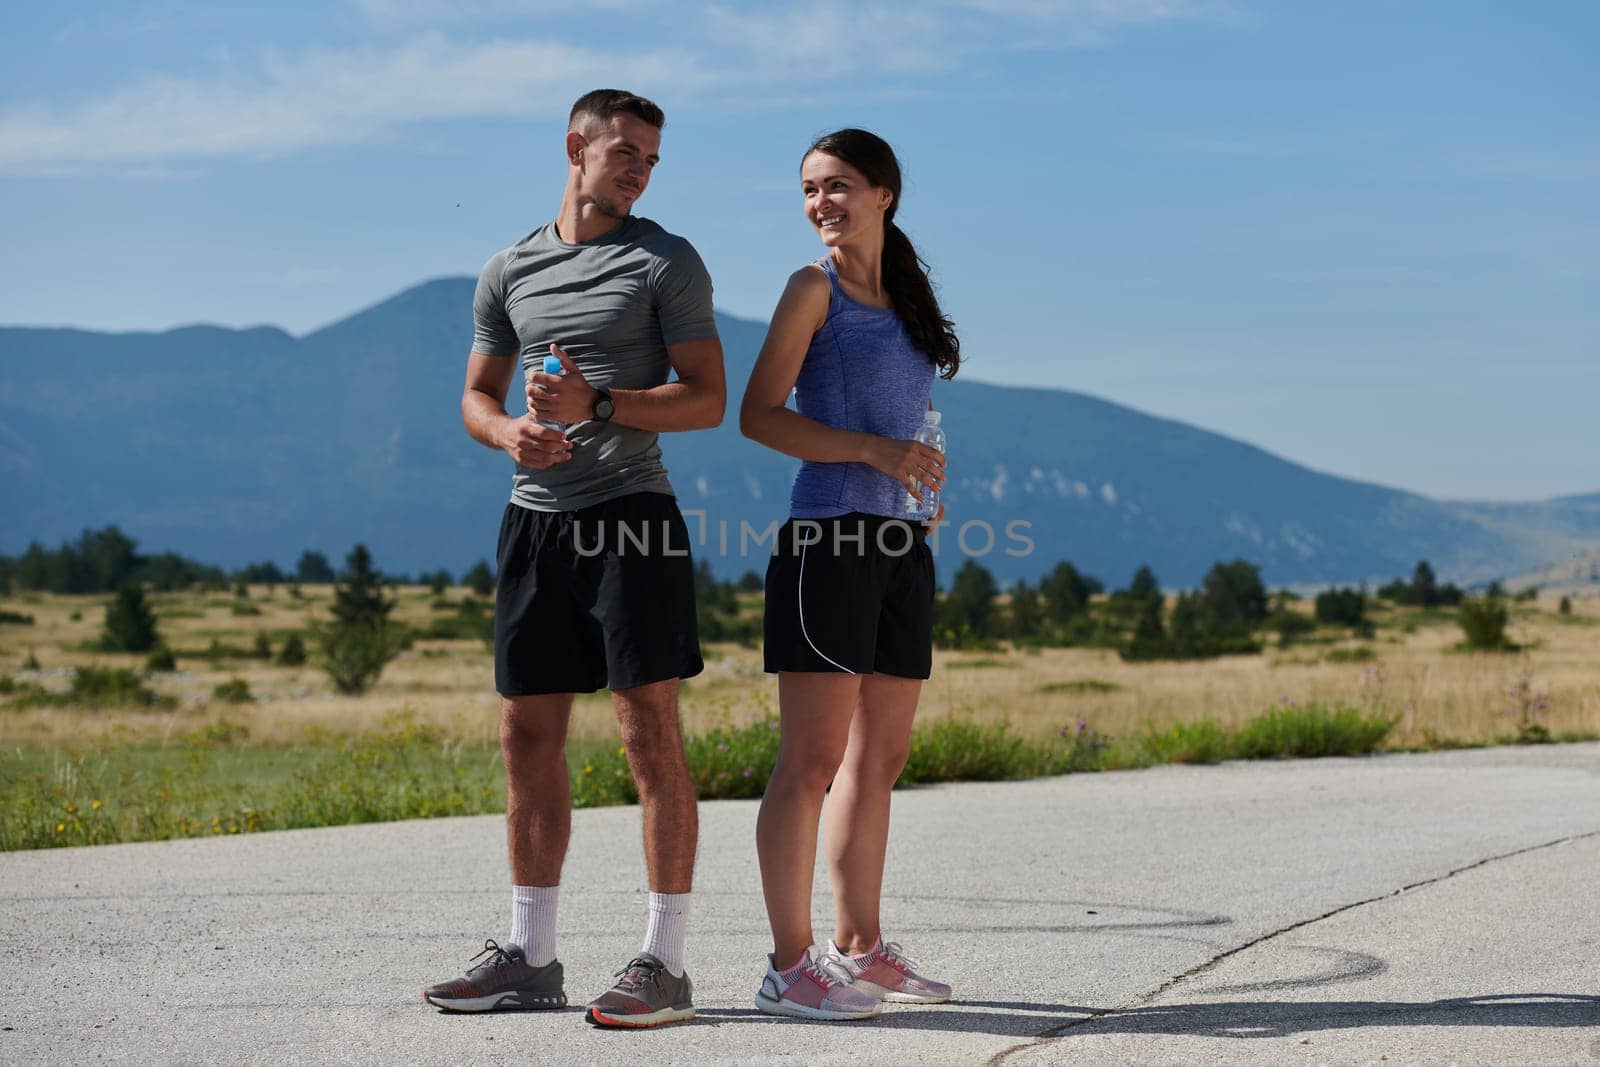 In a serene moment of post-run tranquility, a romantic couple rests together, embodying both exhaustion and affection after a rigorous training session.